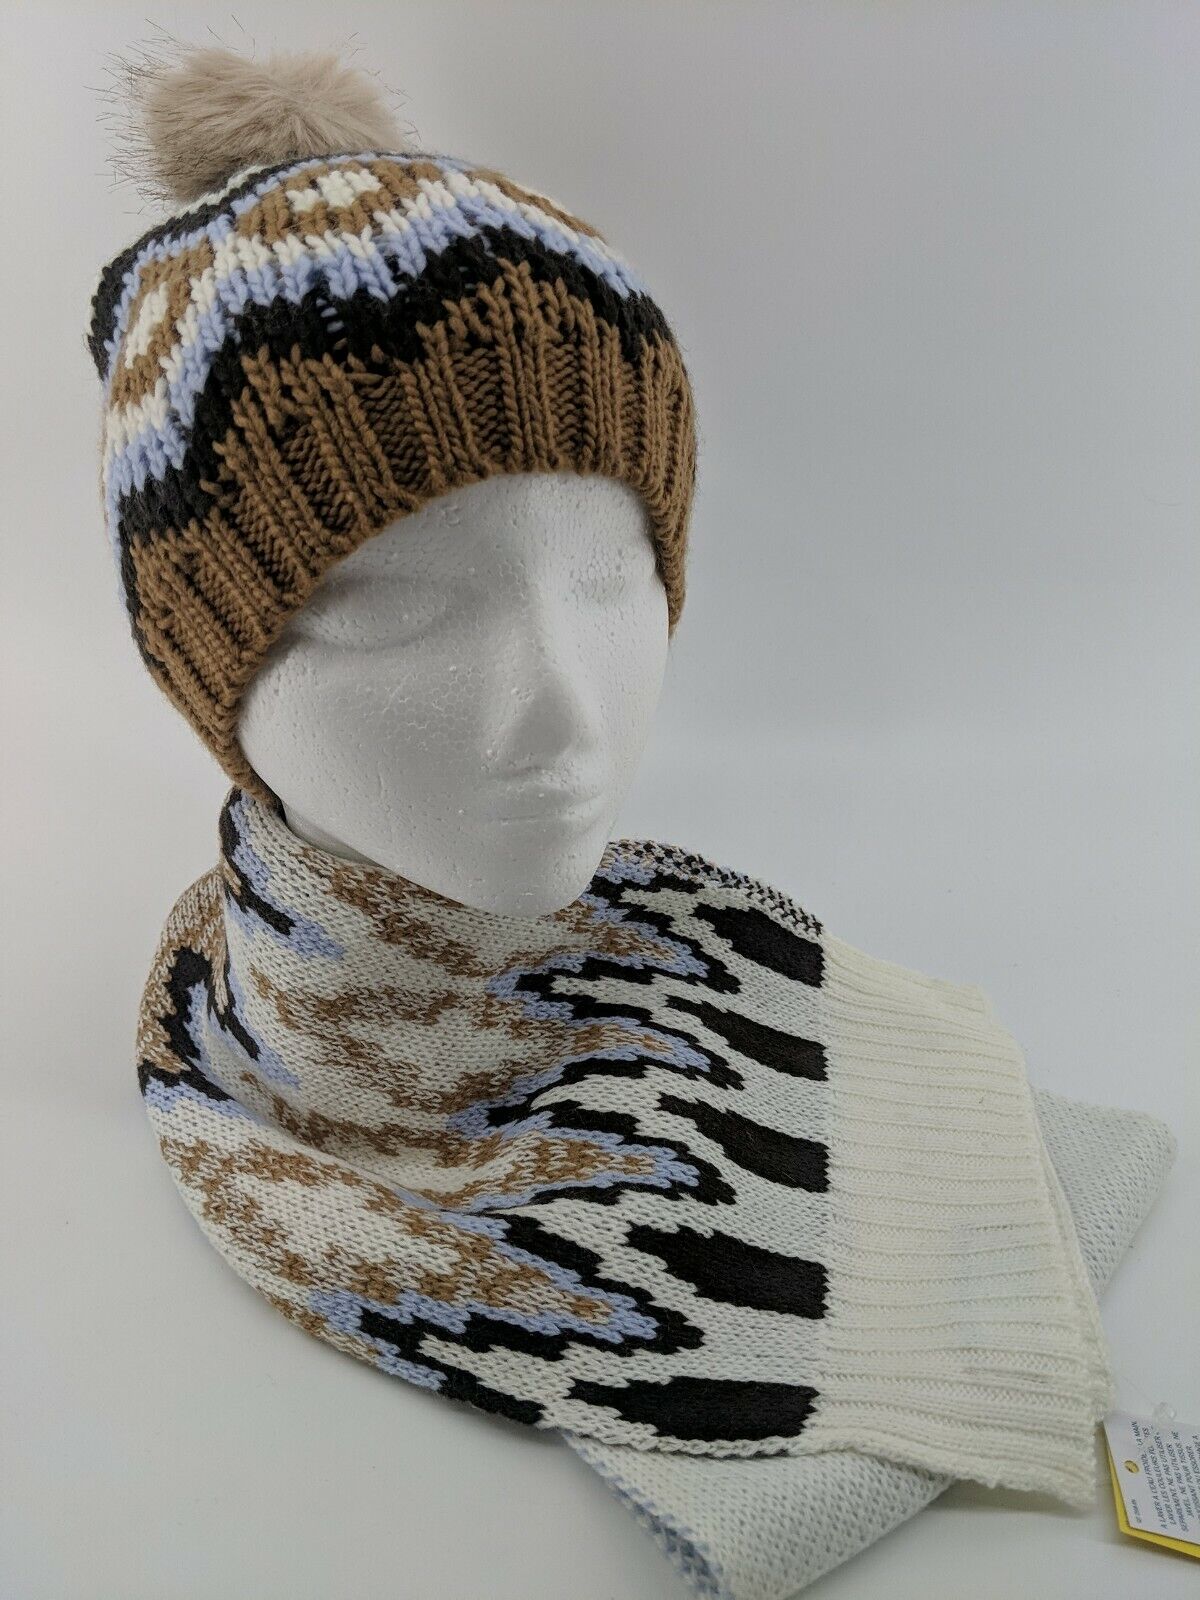 Nwt Lands End Boys Knit Scarf And Bobble Hat Set Xs/s Vicuna Heat Fair Isle